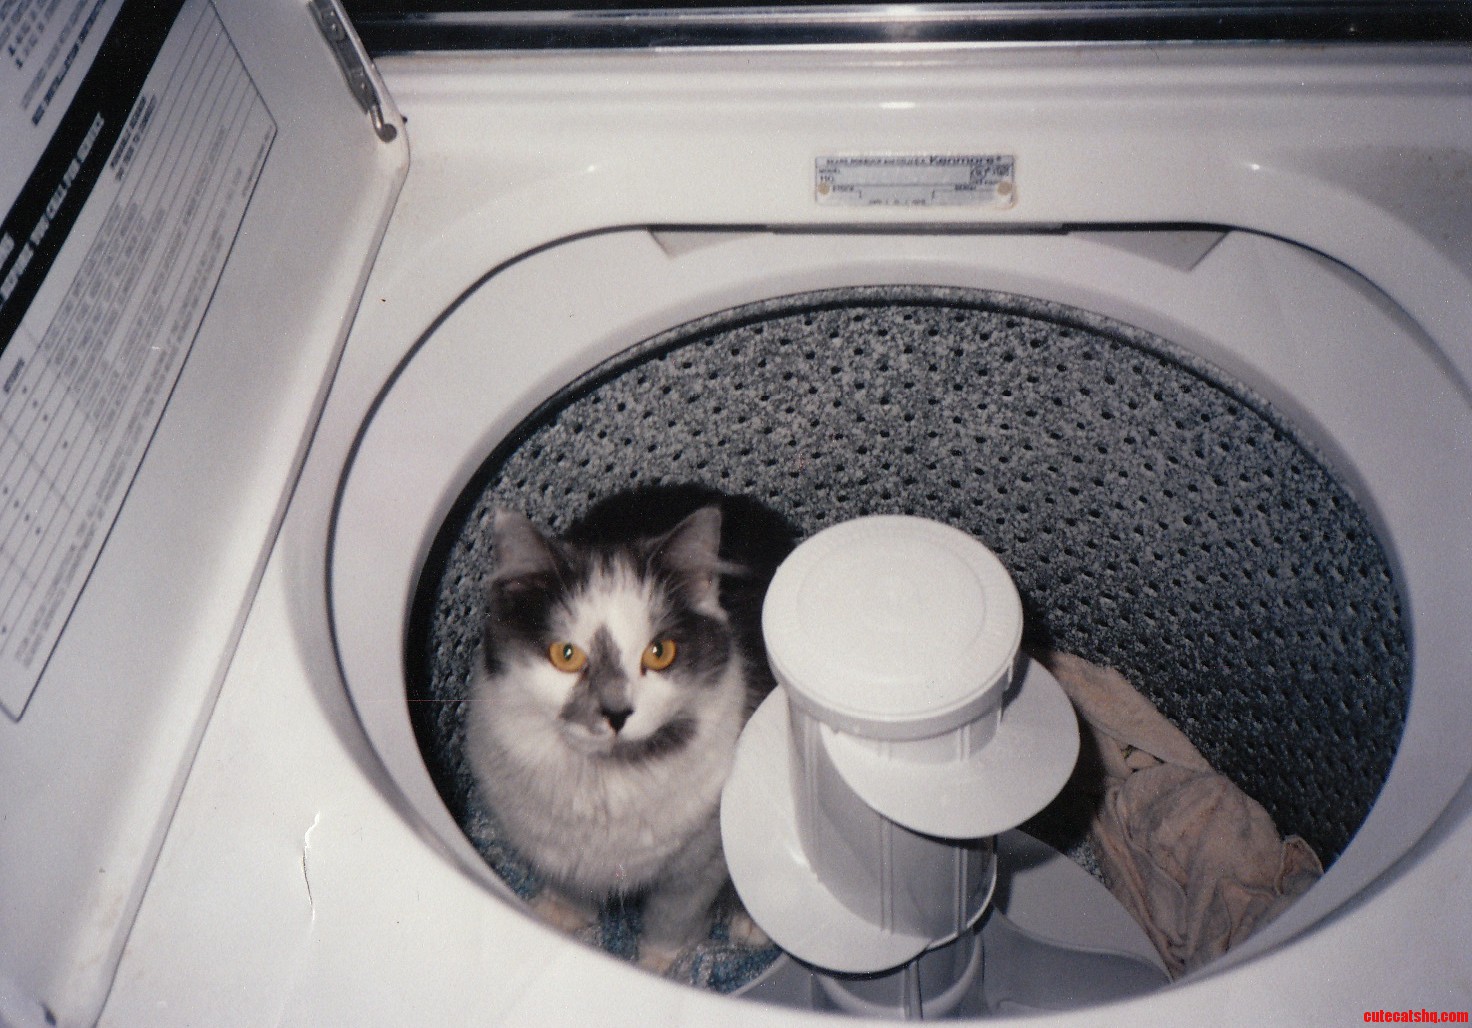 I Think In 23 Years Too Late With This Photo Of My Kitty Hanging Out In The Washer.